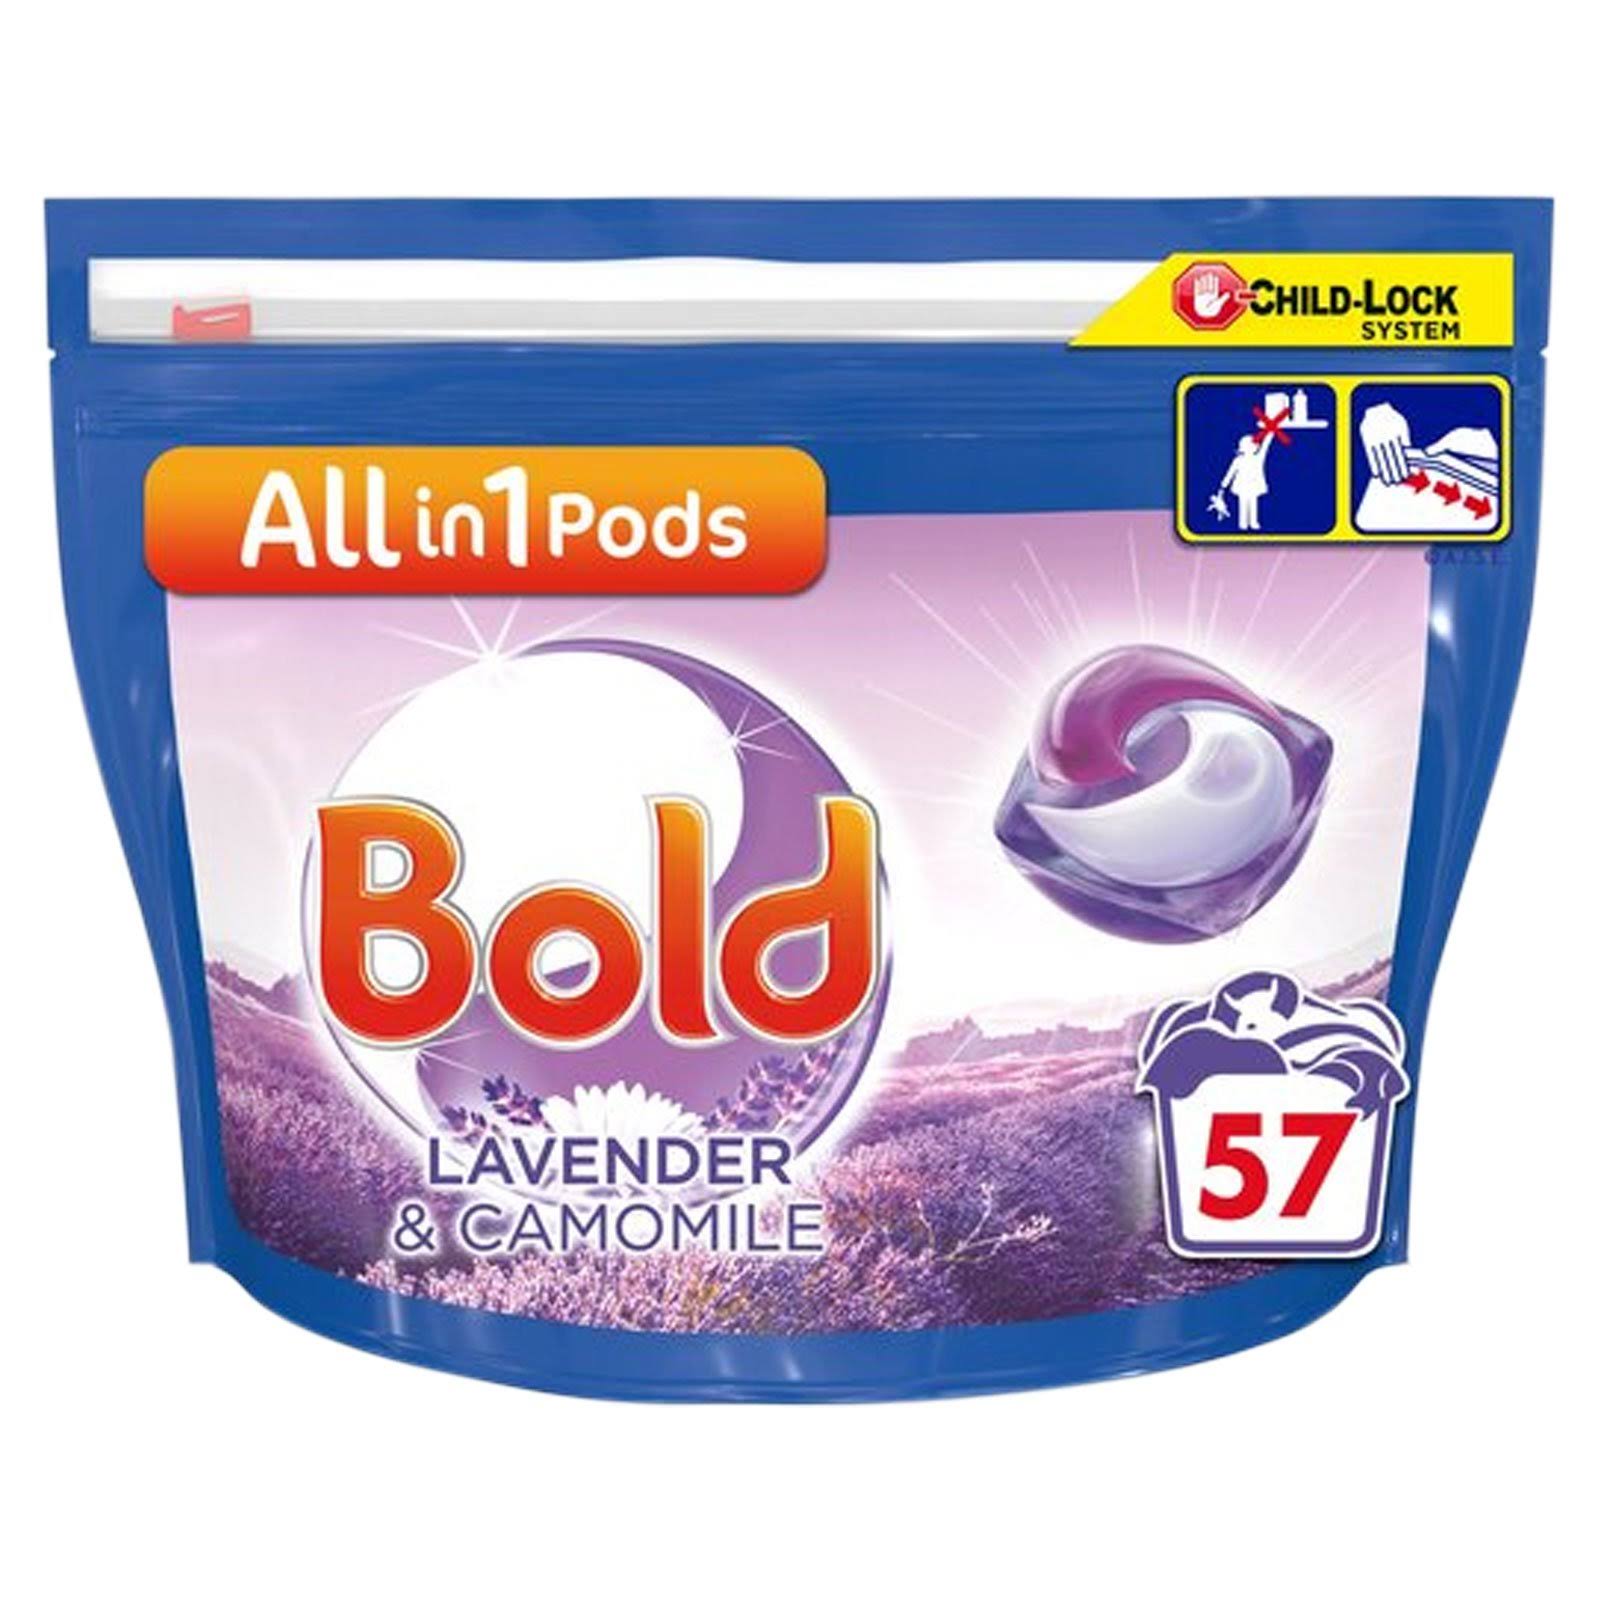 Bold All in 1 Lavender & Camomile Pods,57 Washes